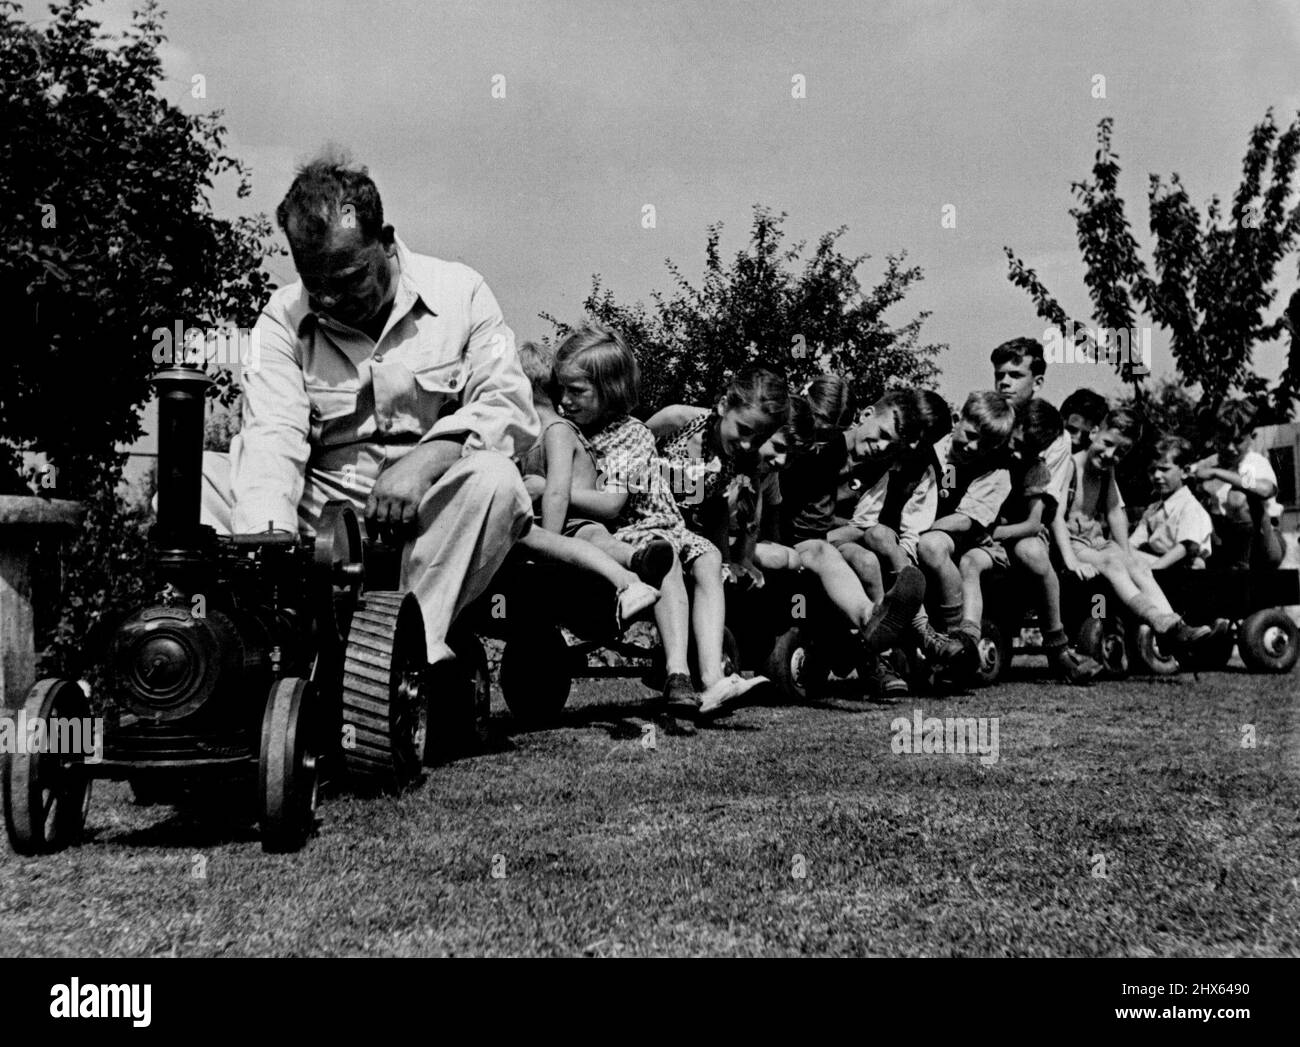 Model Steam Traction Engine -- The model steam tractor is being shown at the Model Engineers Exhibition which opened yesterday in London. Mr. R.G. Hammett who built it, is seen giving a ride to fourteen youngsters round the garden of his home at Den son-road, Boxleyheath. August 18, 1949. Stock Photo